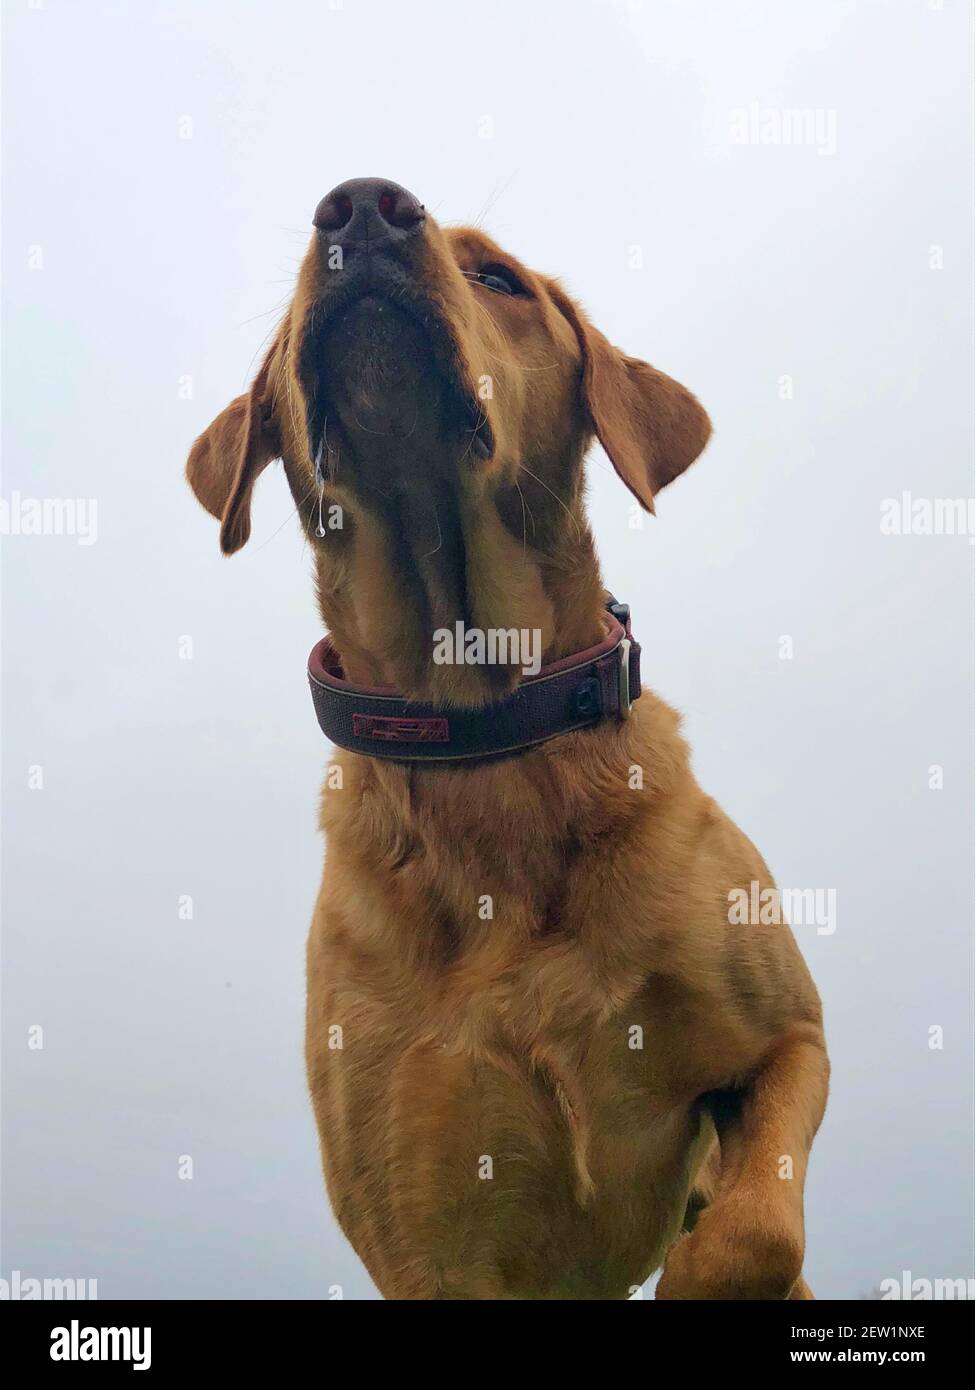 Underneath a Labrador retriever dog looking up and pointing with drool Stock Photo